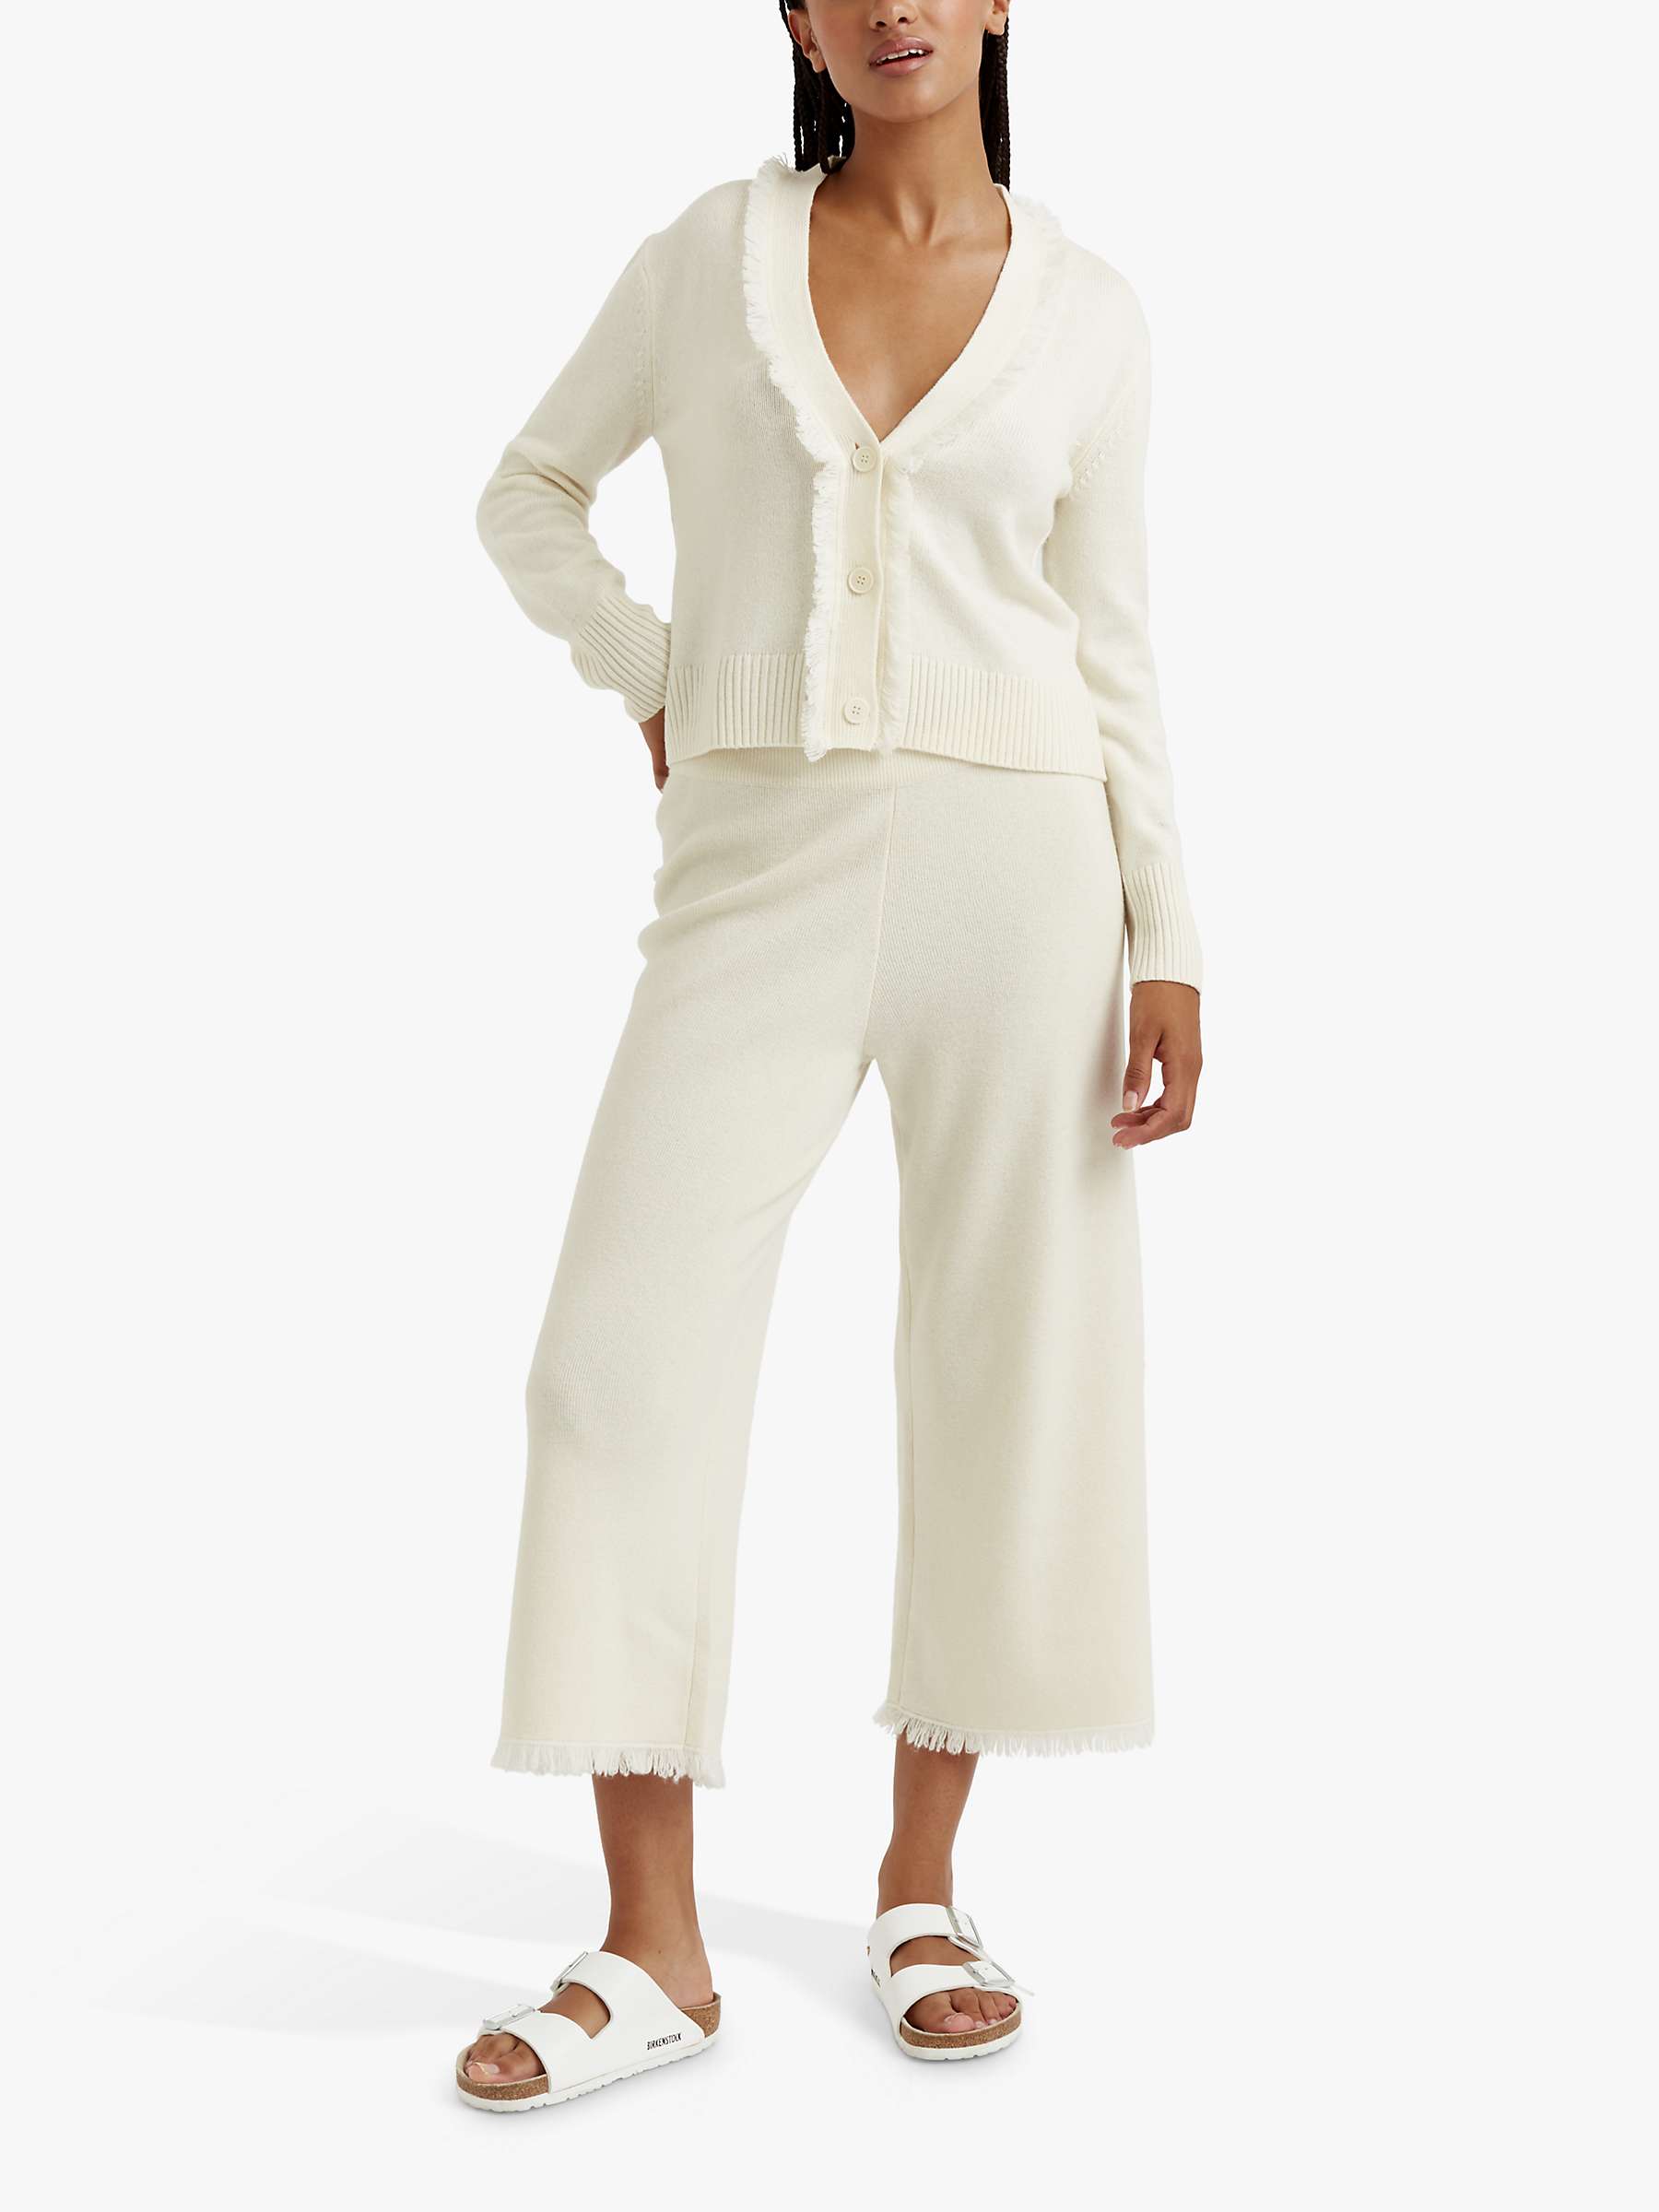 Buy Chinti & Parker Cashmere Fringe Wide Leg Trousers Online at johnlewis.com